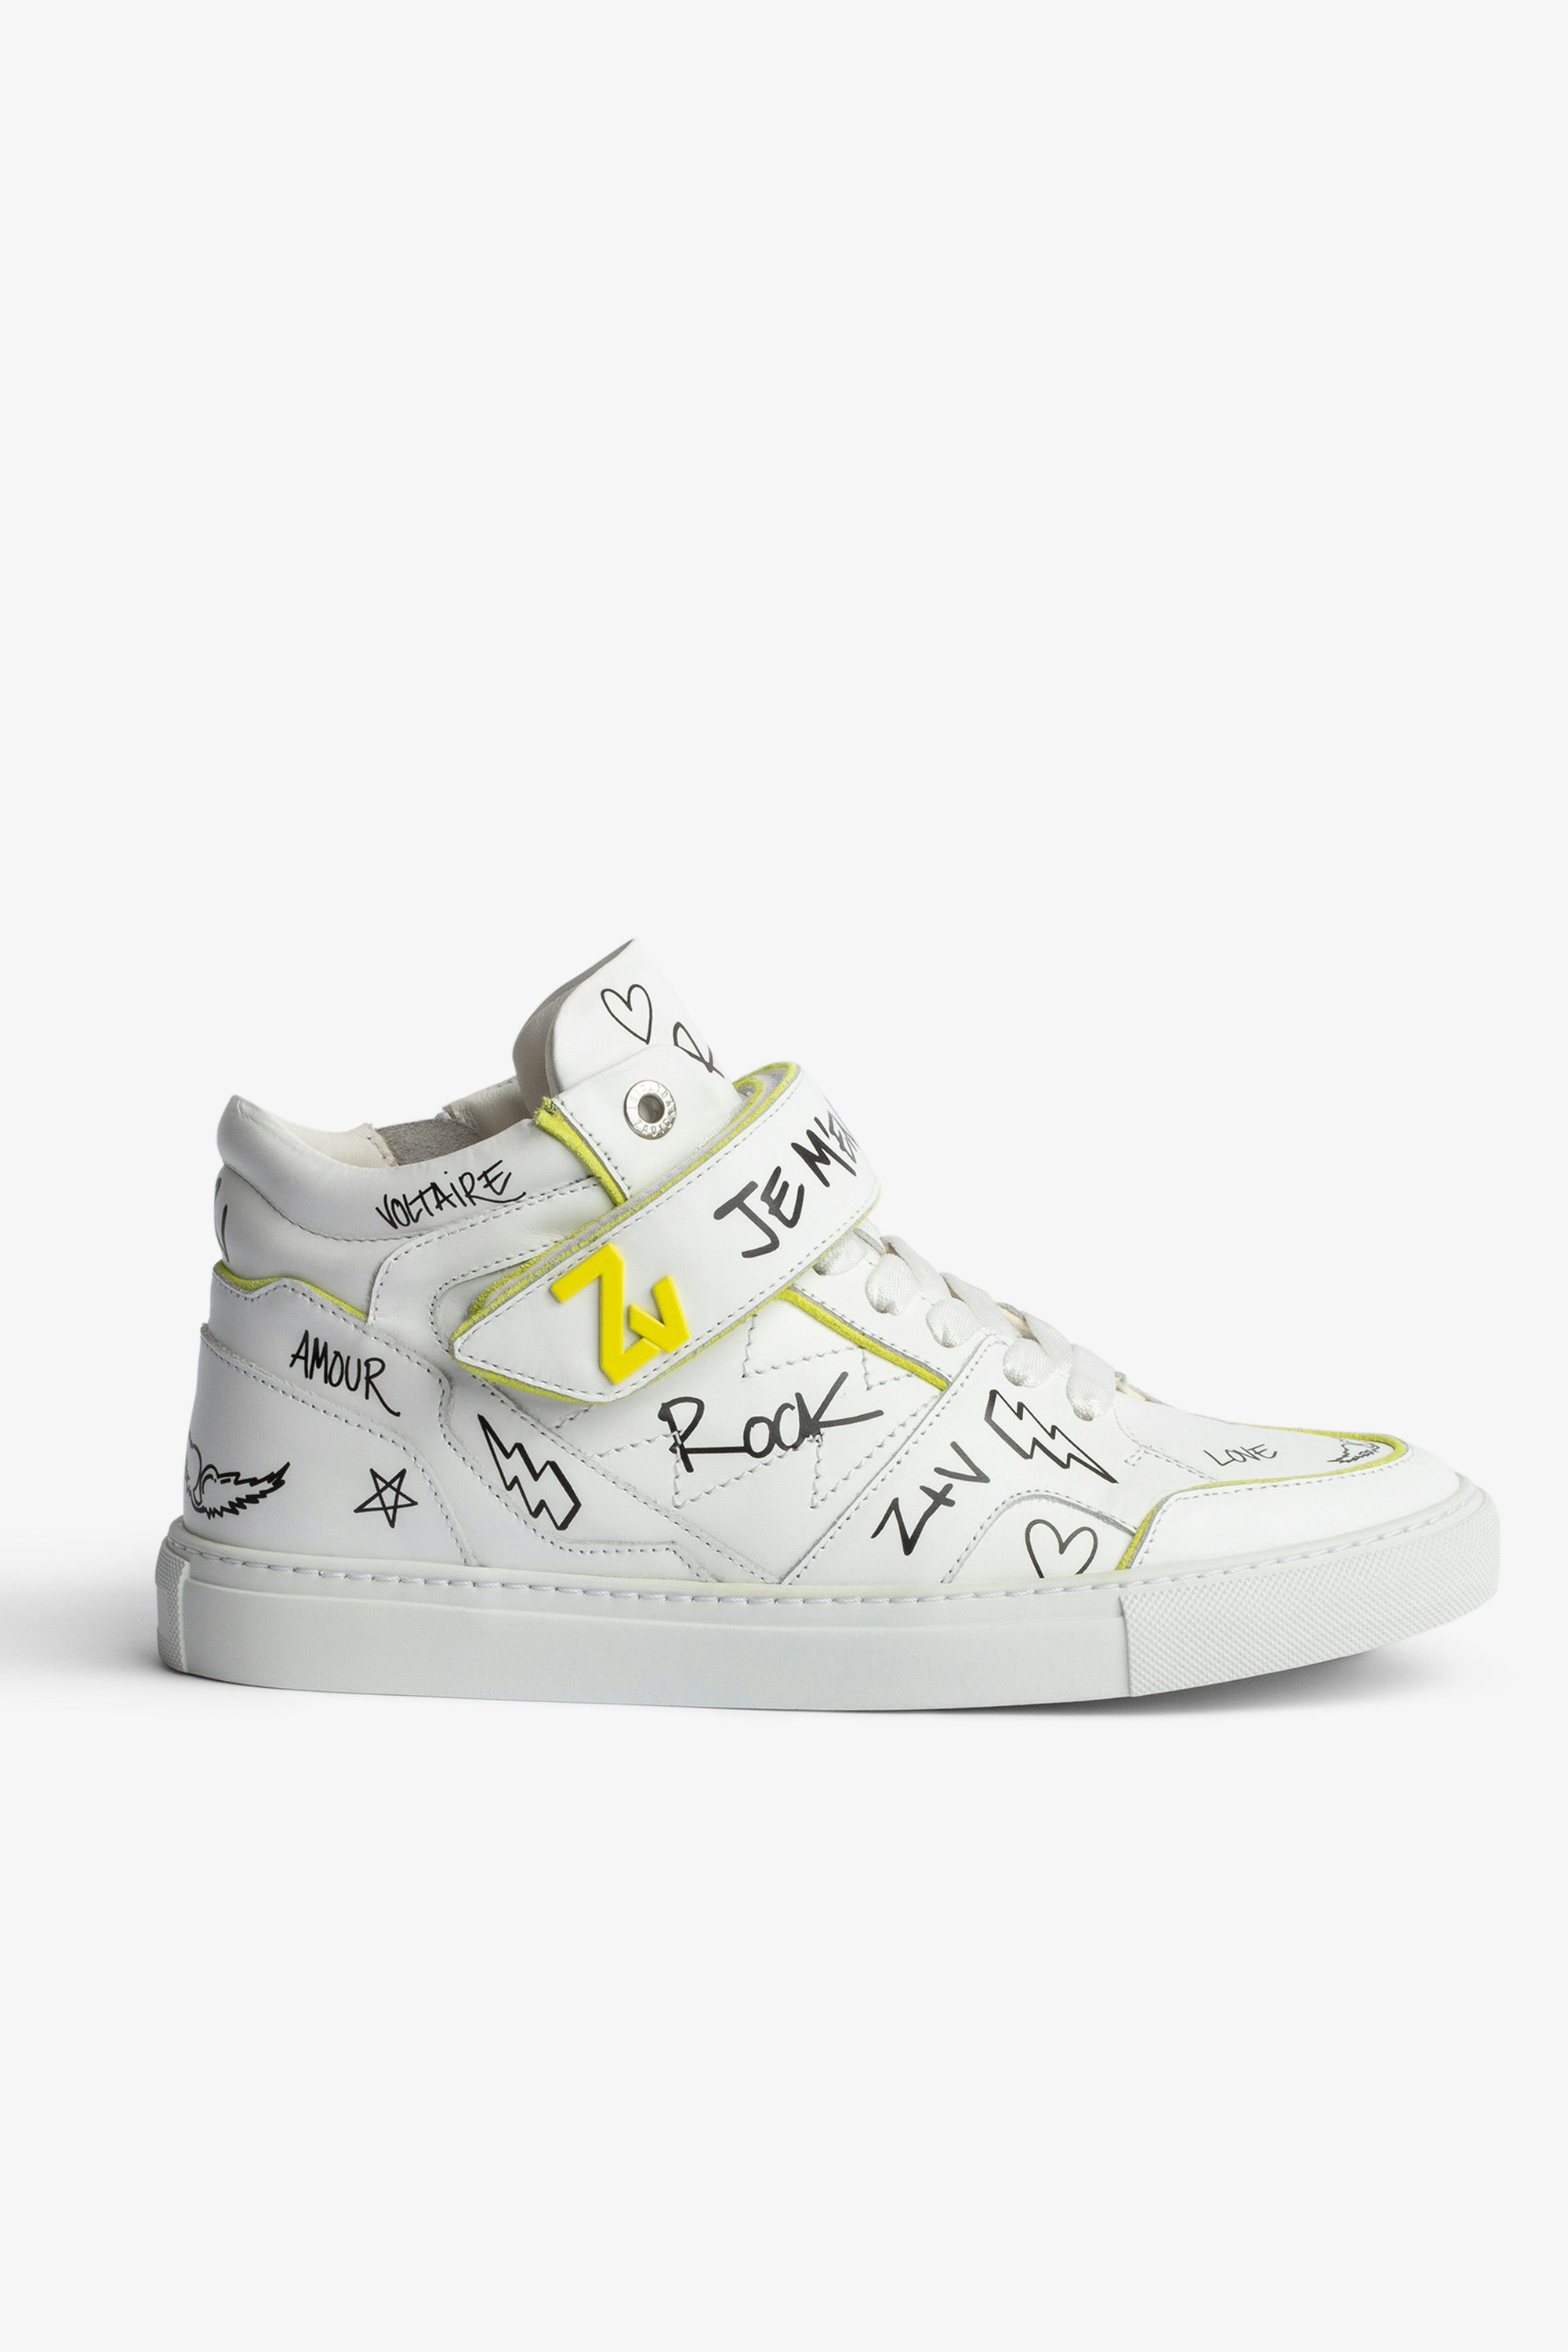 ZV1747 Mid Flash Fluorescent Suede Charms スニーカー Suede mid-top sneakers with lettering and Velcro fastening